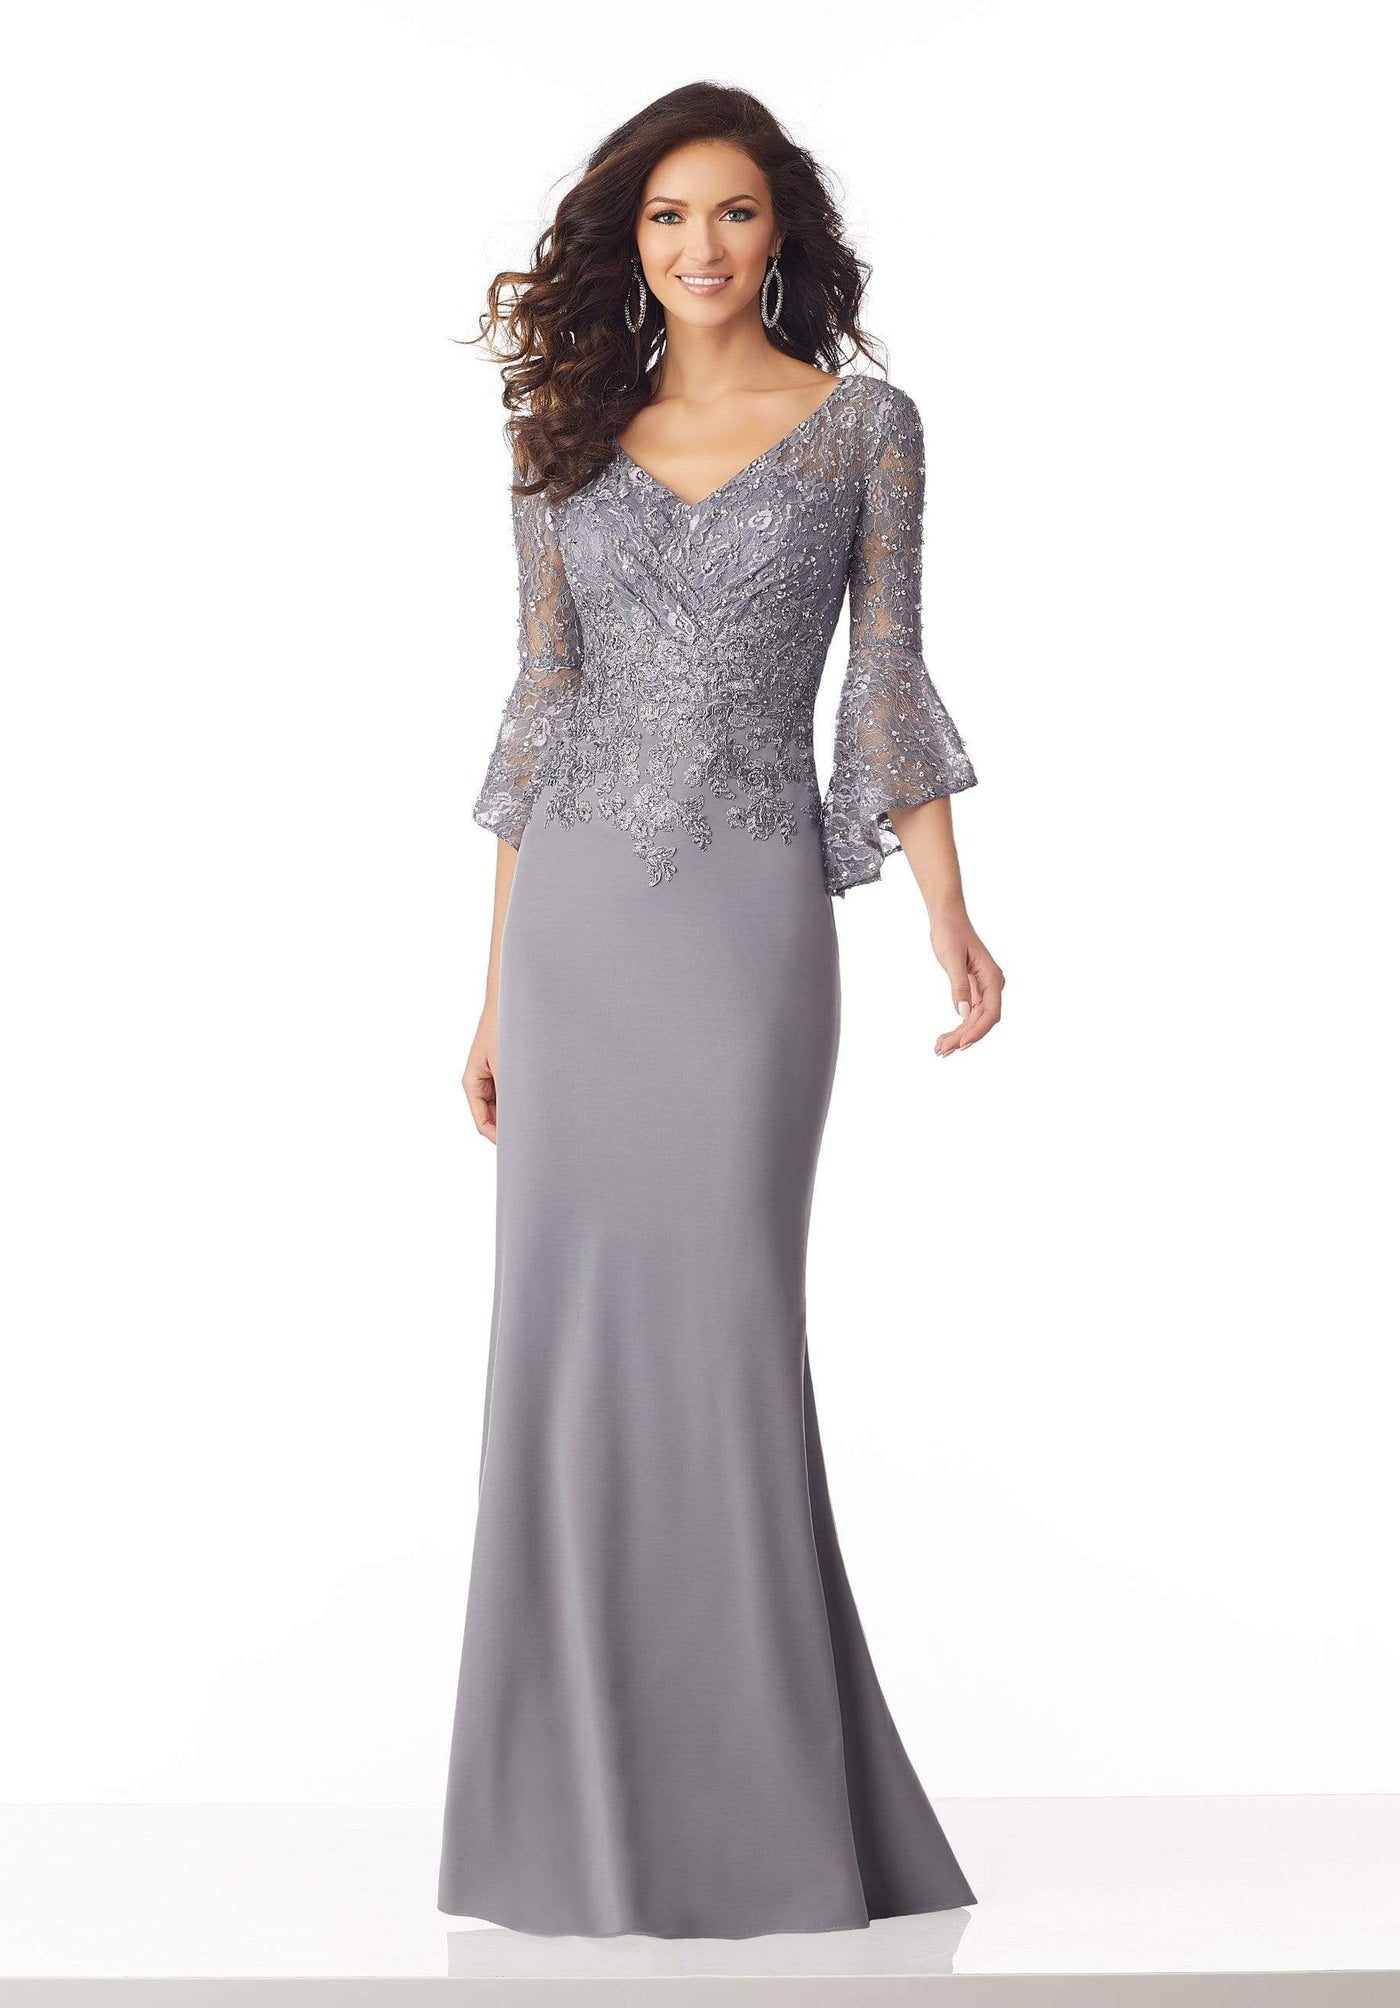 MGNY By Mori Lee - 71810 Embroidered V-neck Trumpet Dress Mother of the Bride Dresses 0 / Silver